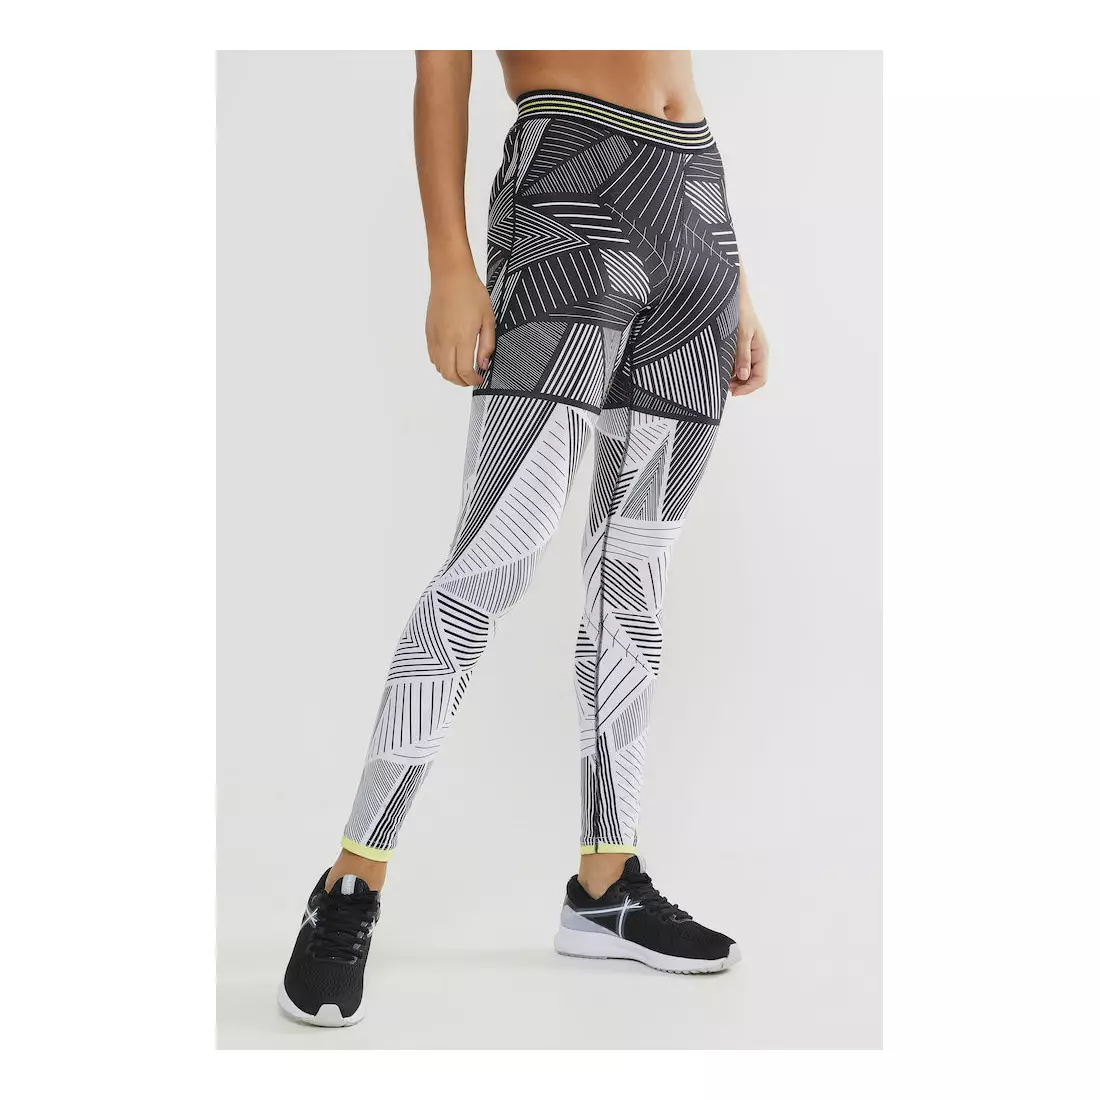 CRAFT LUX Tights women's running pants 1906470-999506